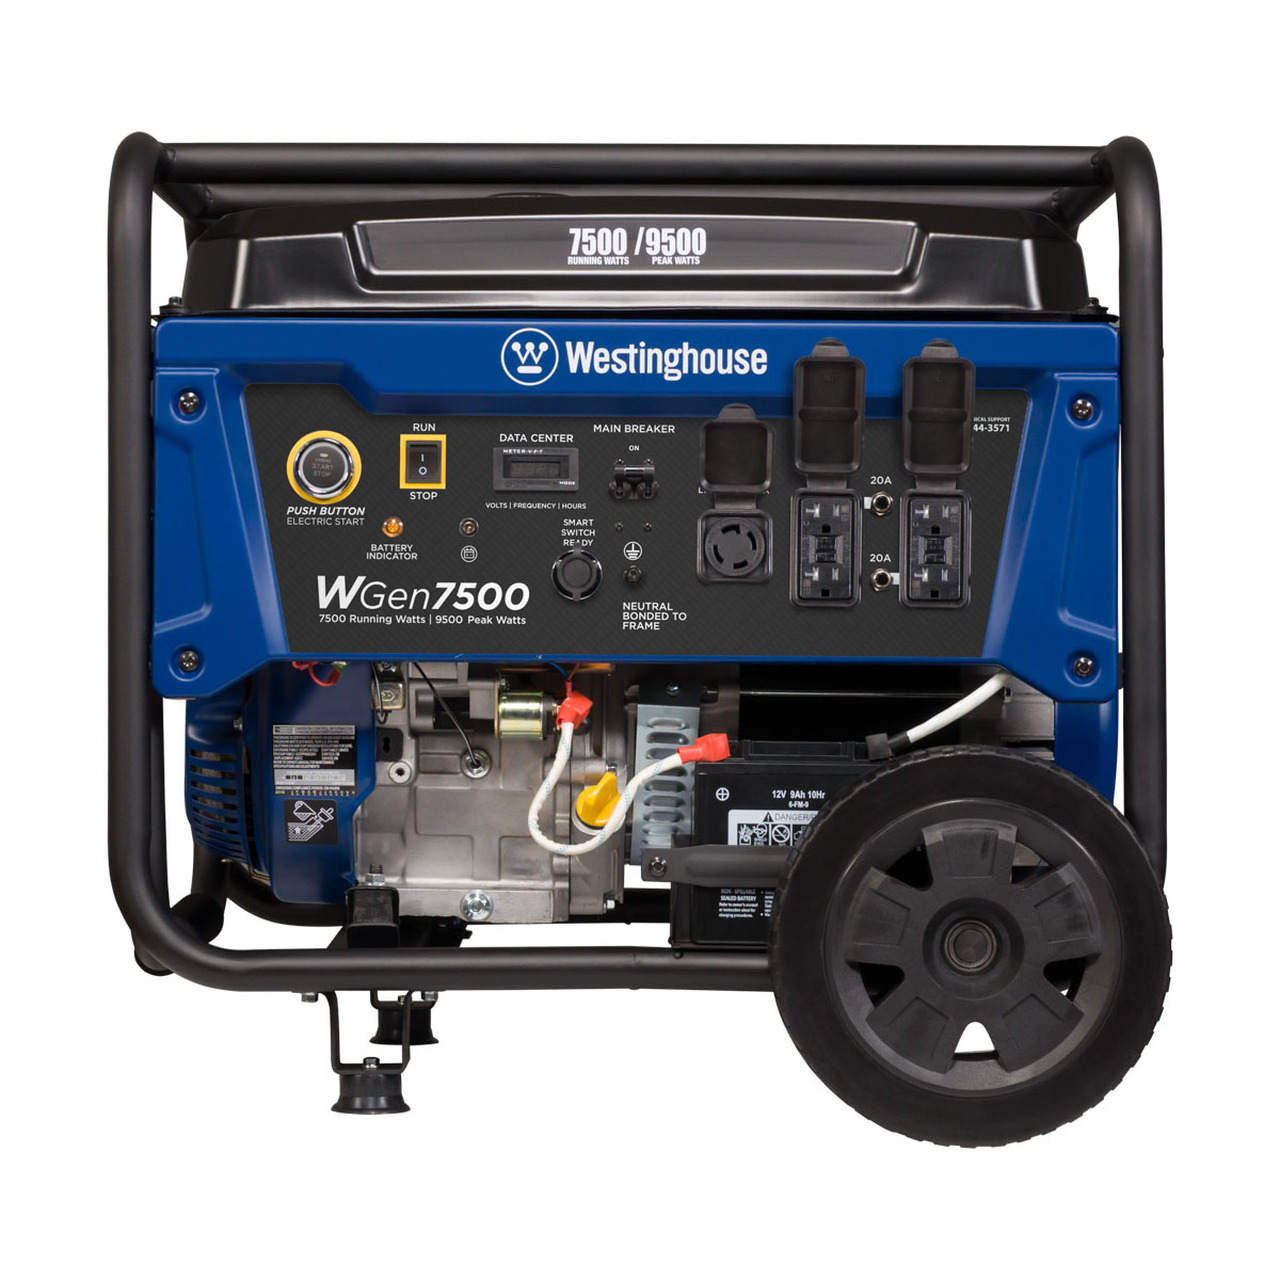 Westinghouse WGen7500 WGen7500 9,500/7,500 Watt Gas Powered Portable  Generator with Remote Start and Transfer Switch Outlet for Home Backup  Manual | Manualzz